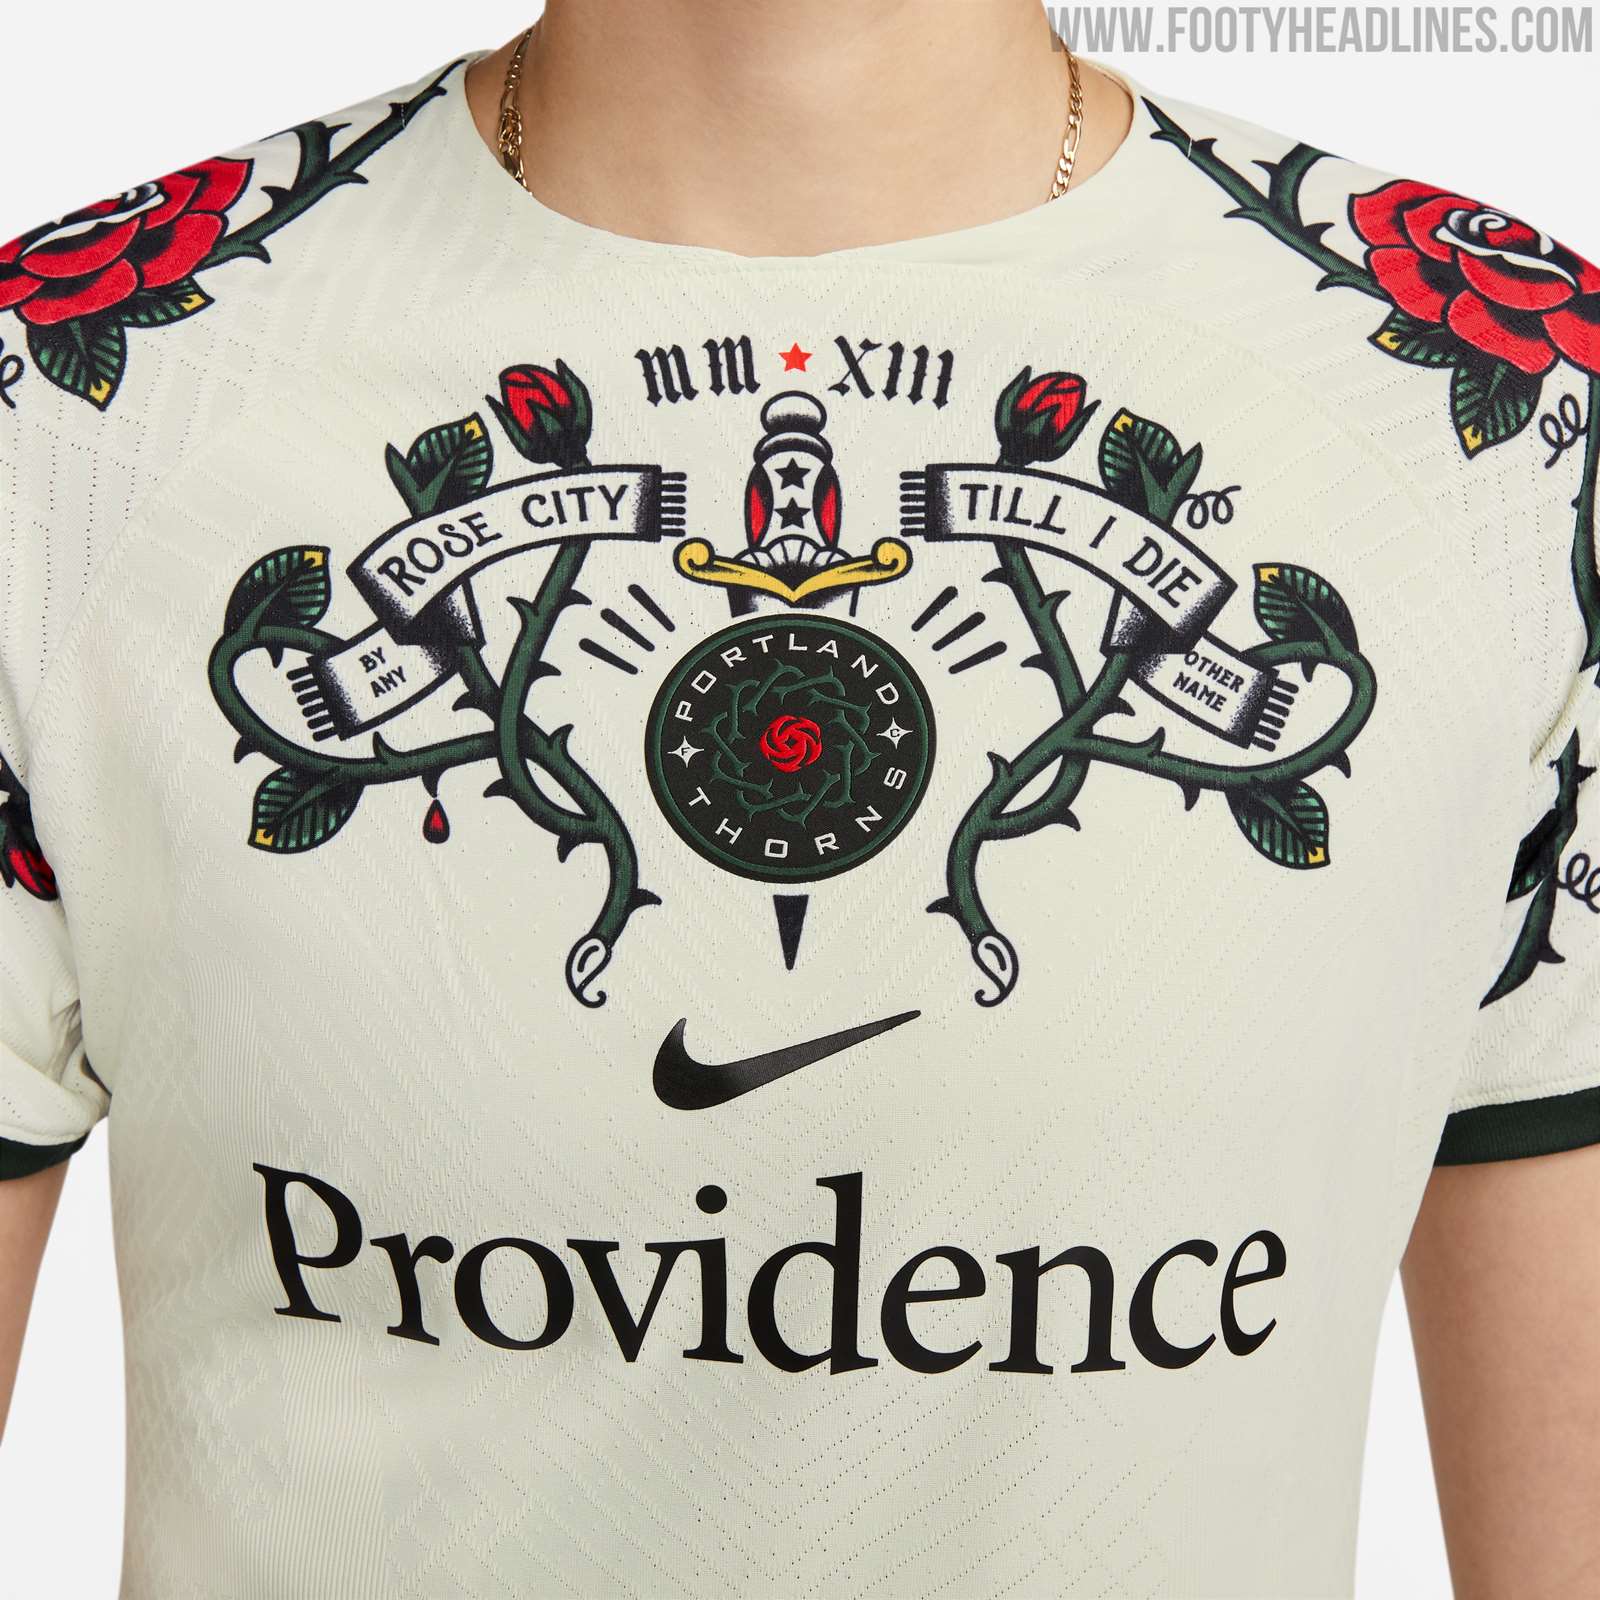 Nike Portland Thorns 2023 Authentic Away Jersey, Men's, Small, White